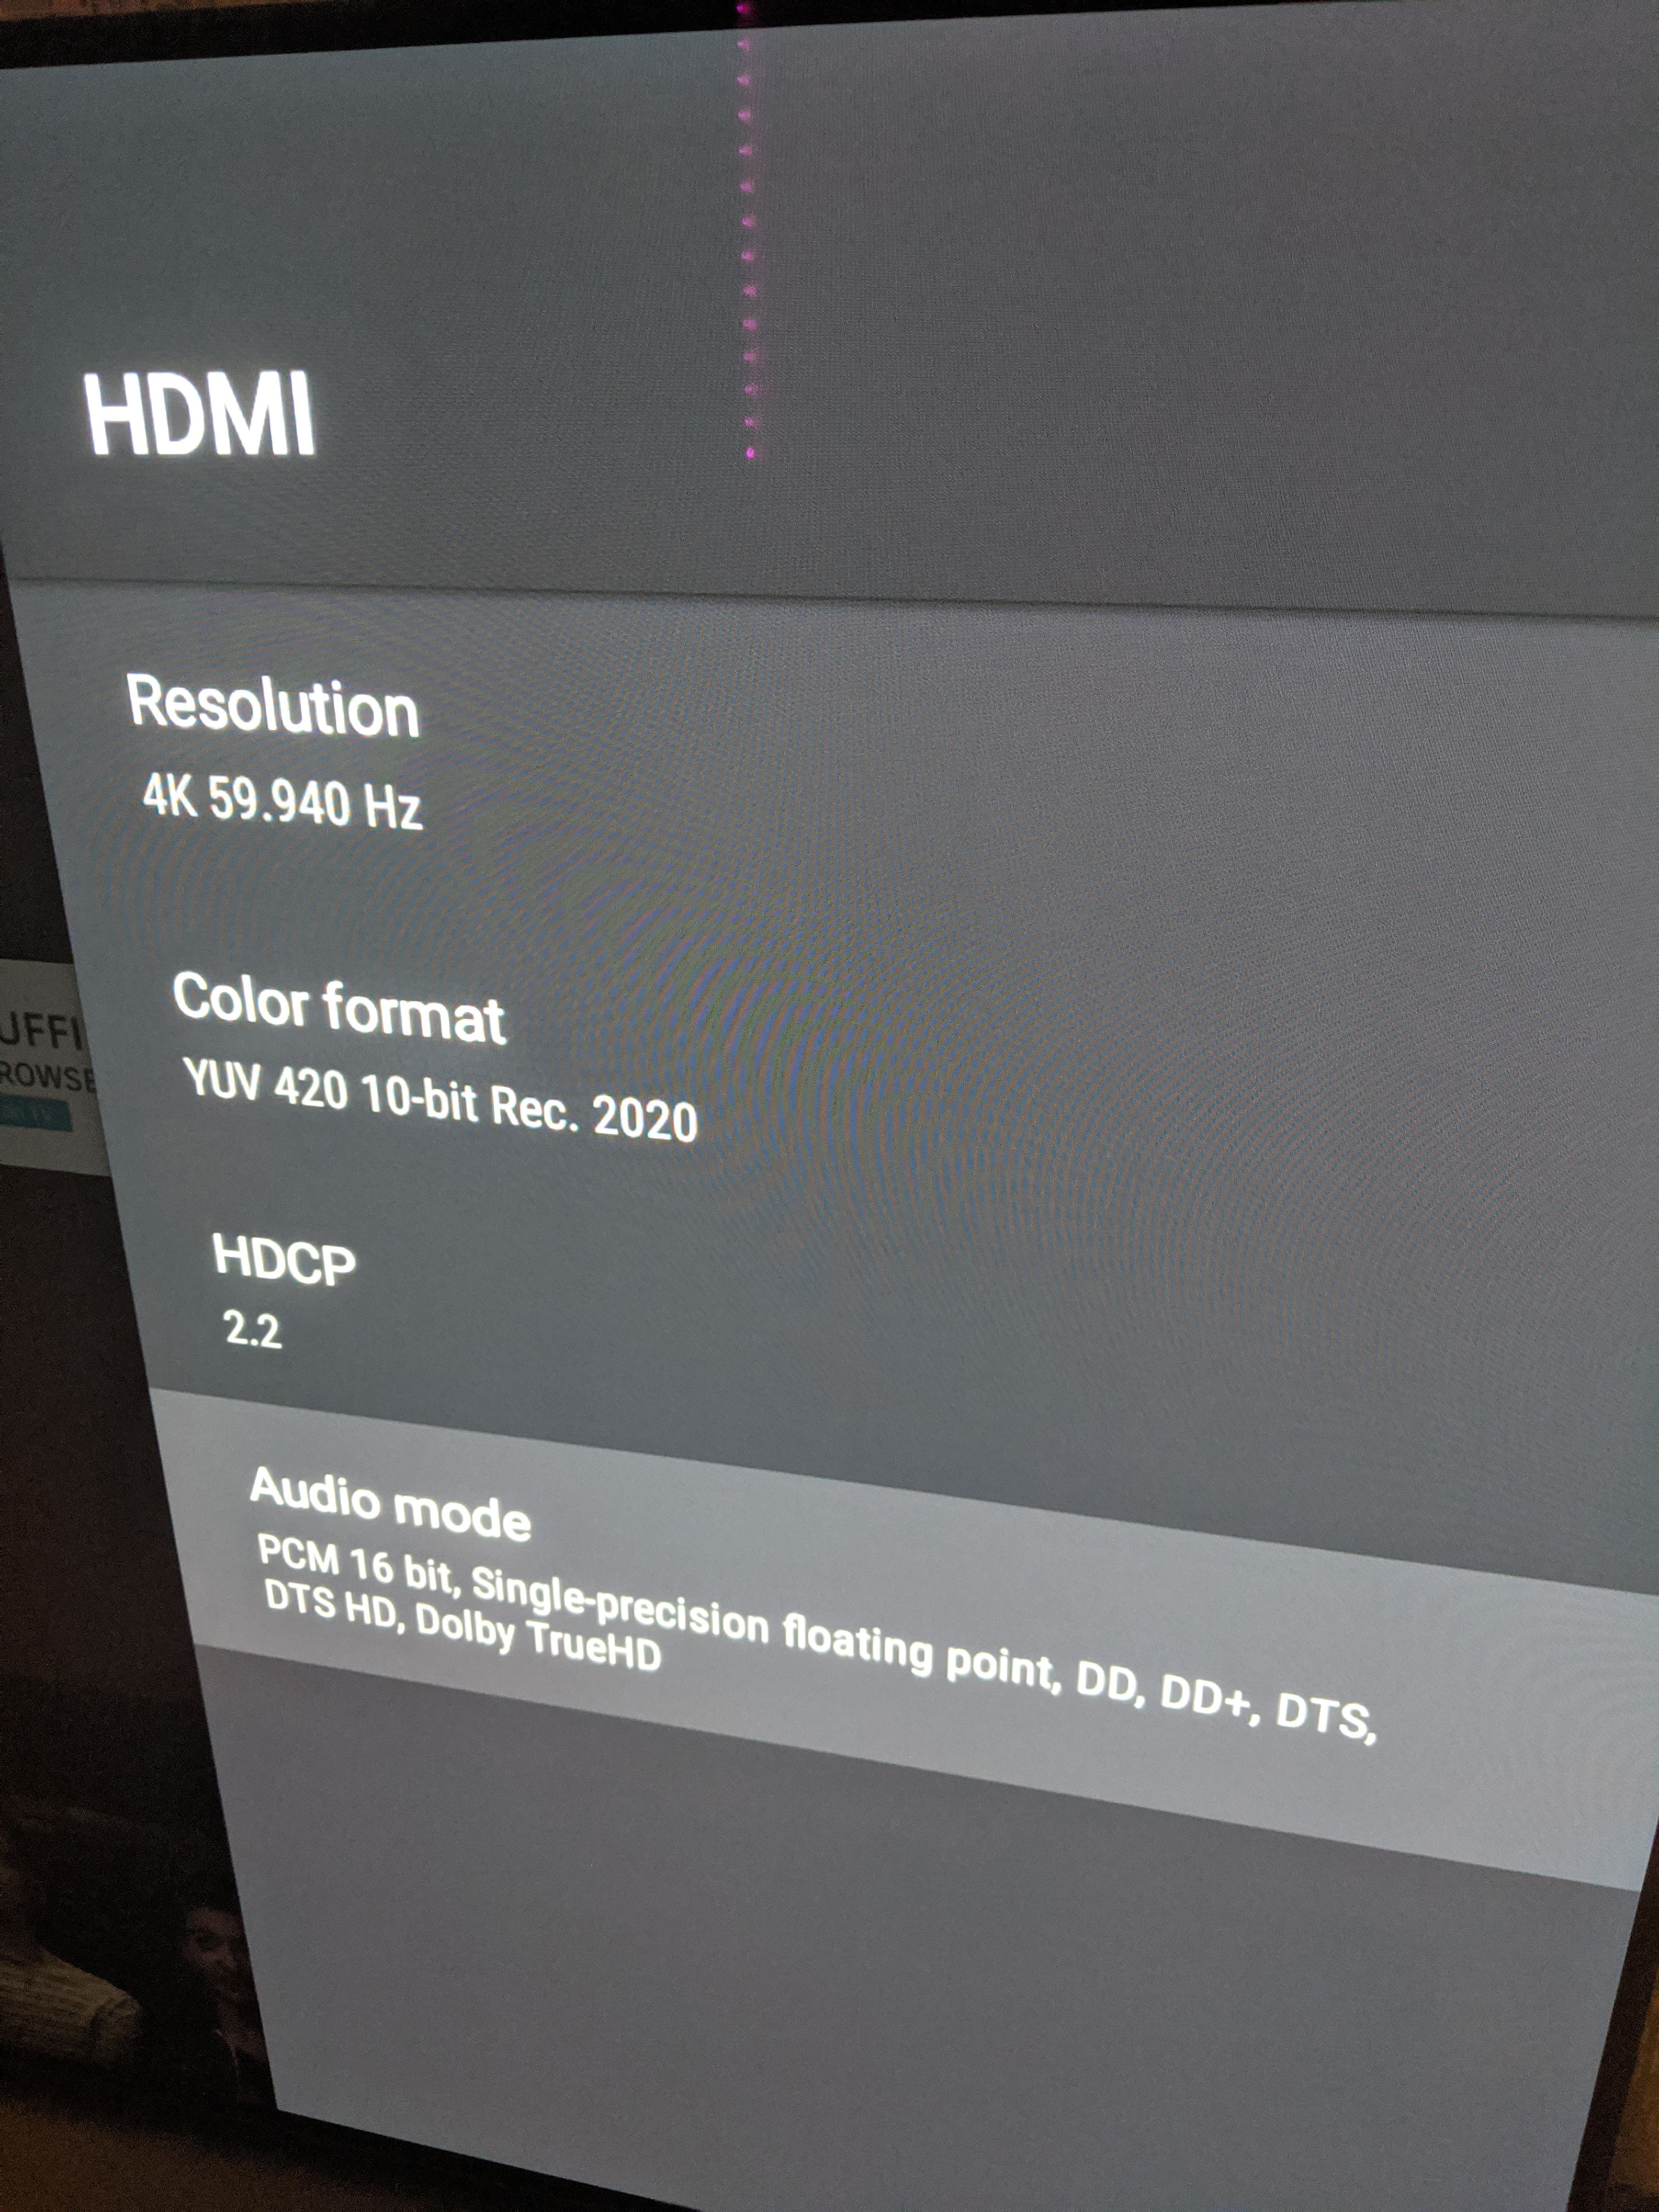 What is going on with eARC update for the soundbar HW-Q90R? - Page 59 -  Samsung Community